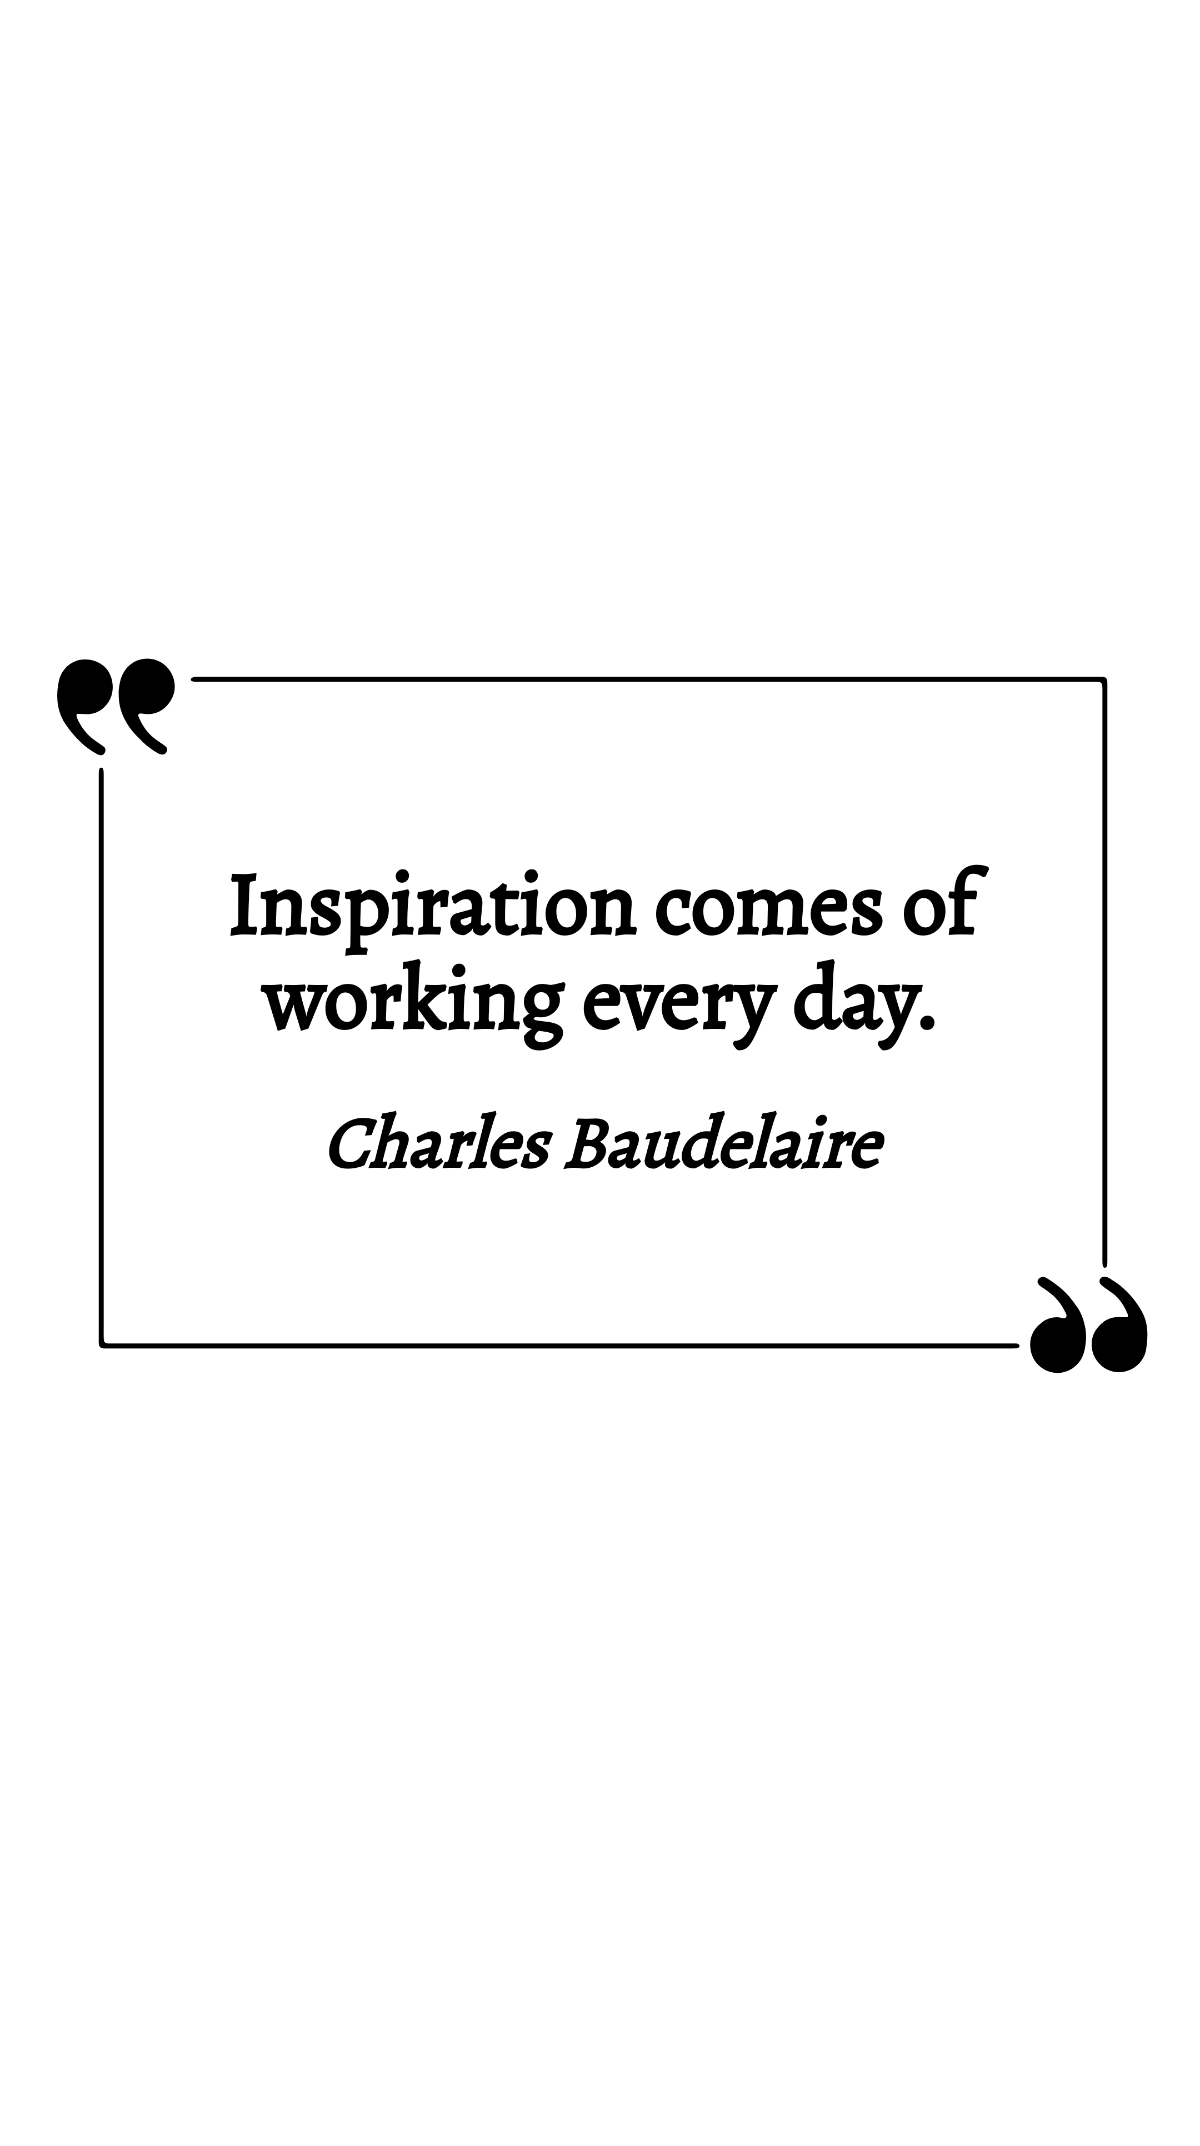 Charles Baudelaire - Inspiration comes of working every day. Template